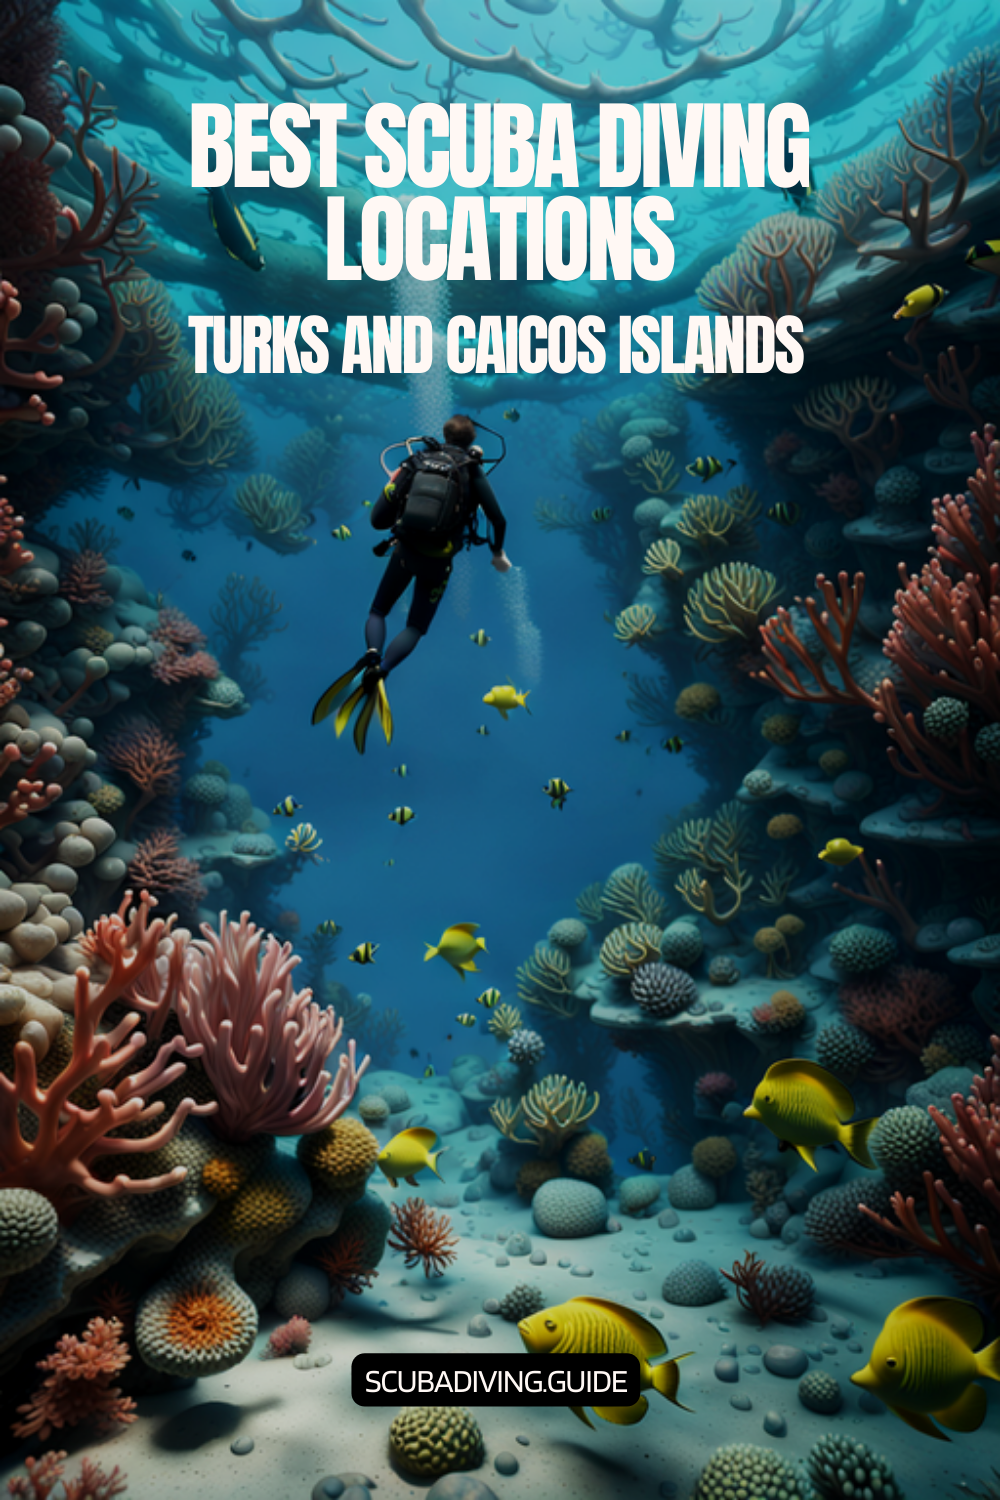 Scuba Diving Locations in The Turks And Caicos Islands